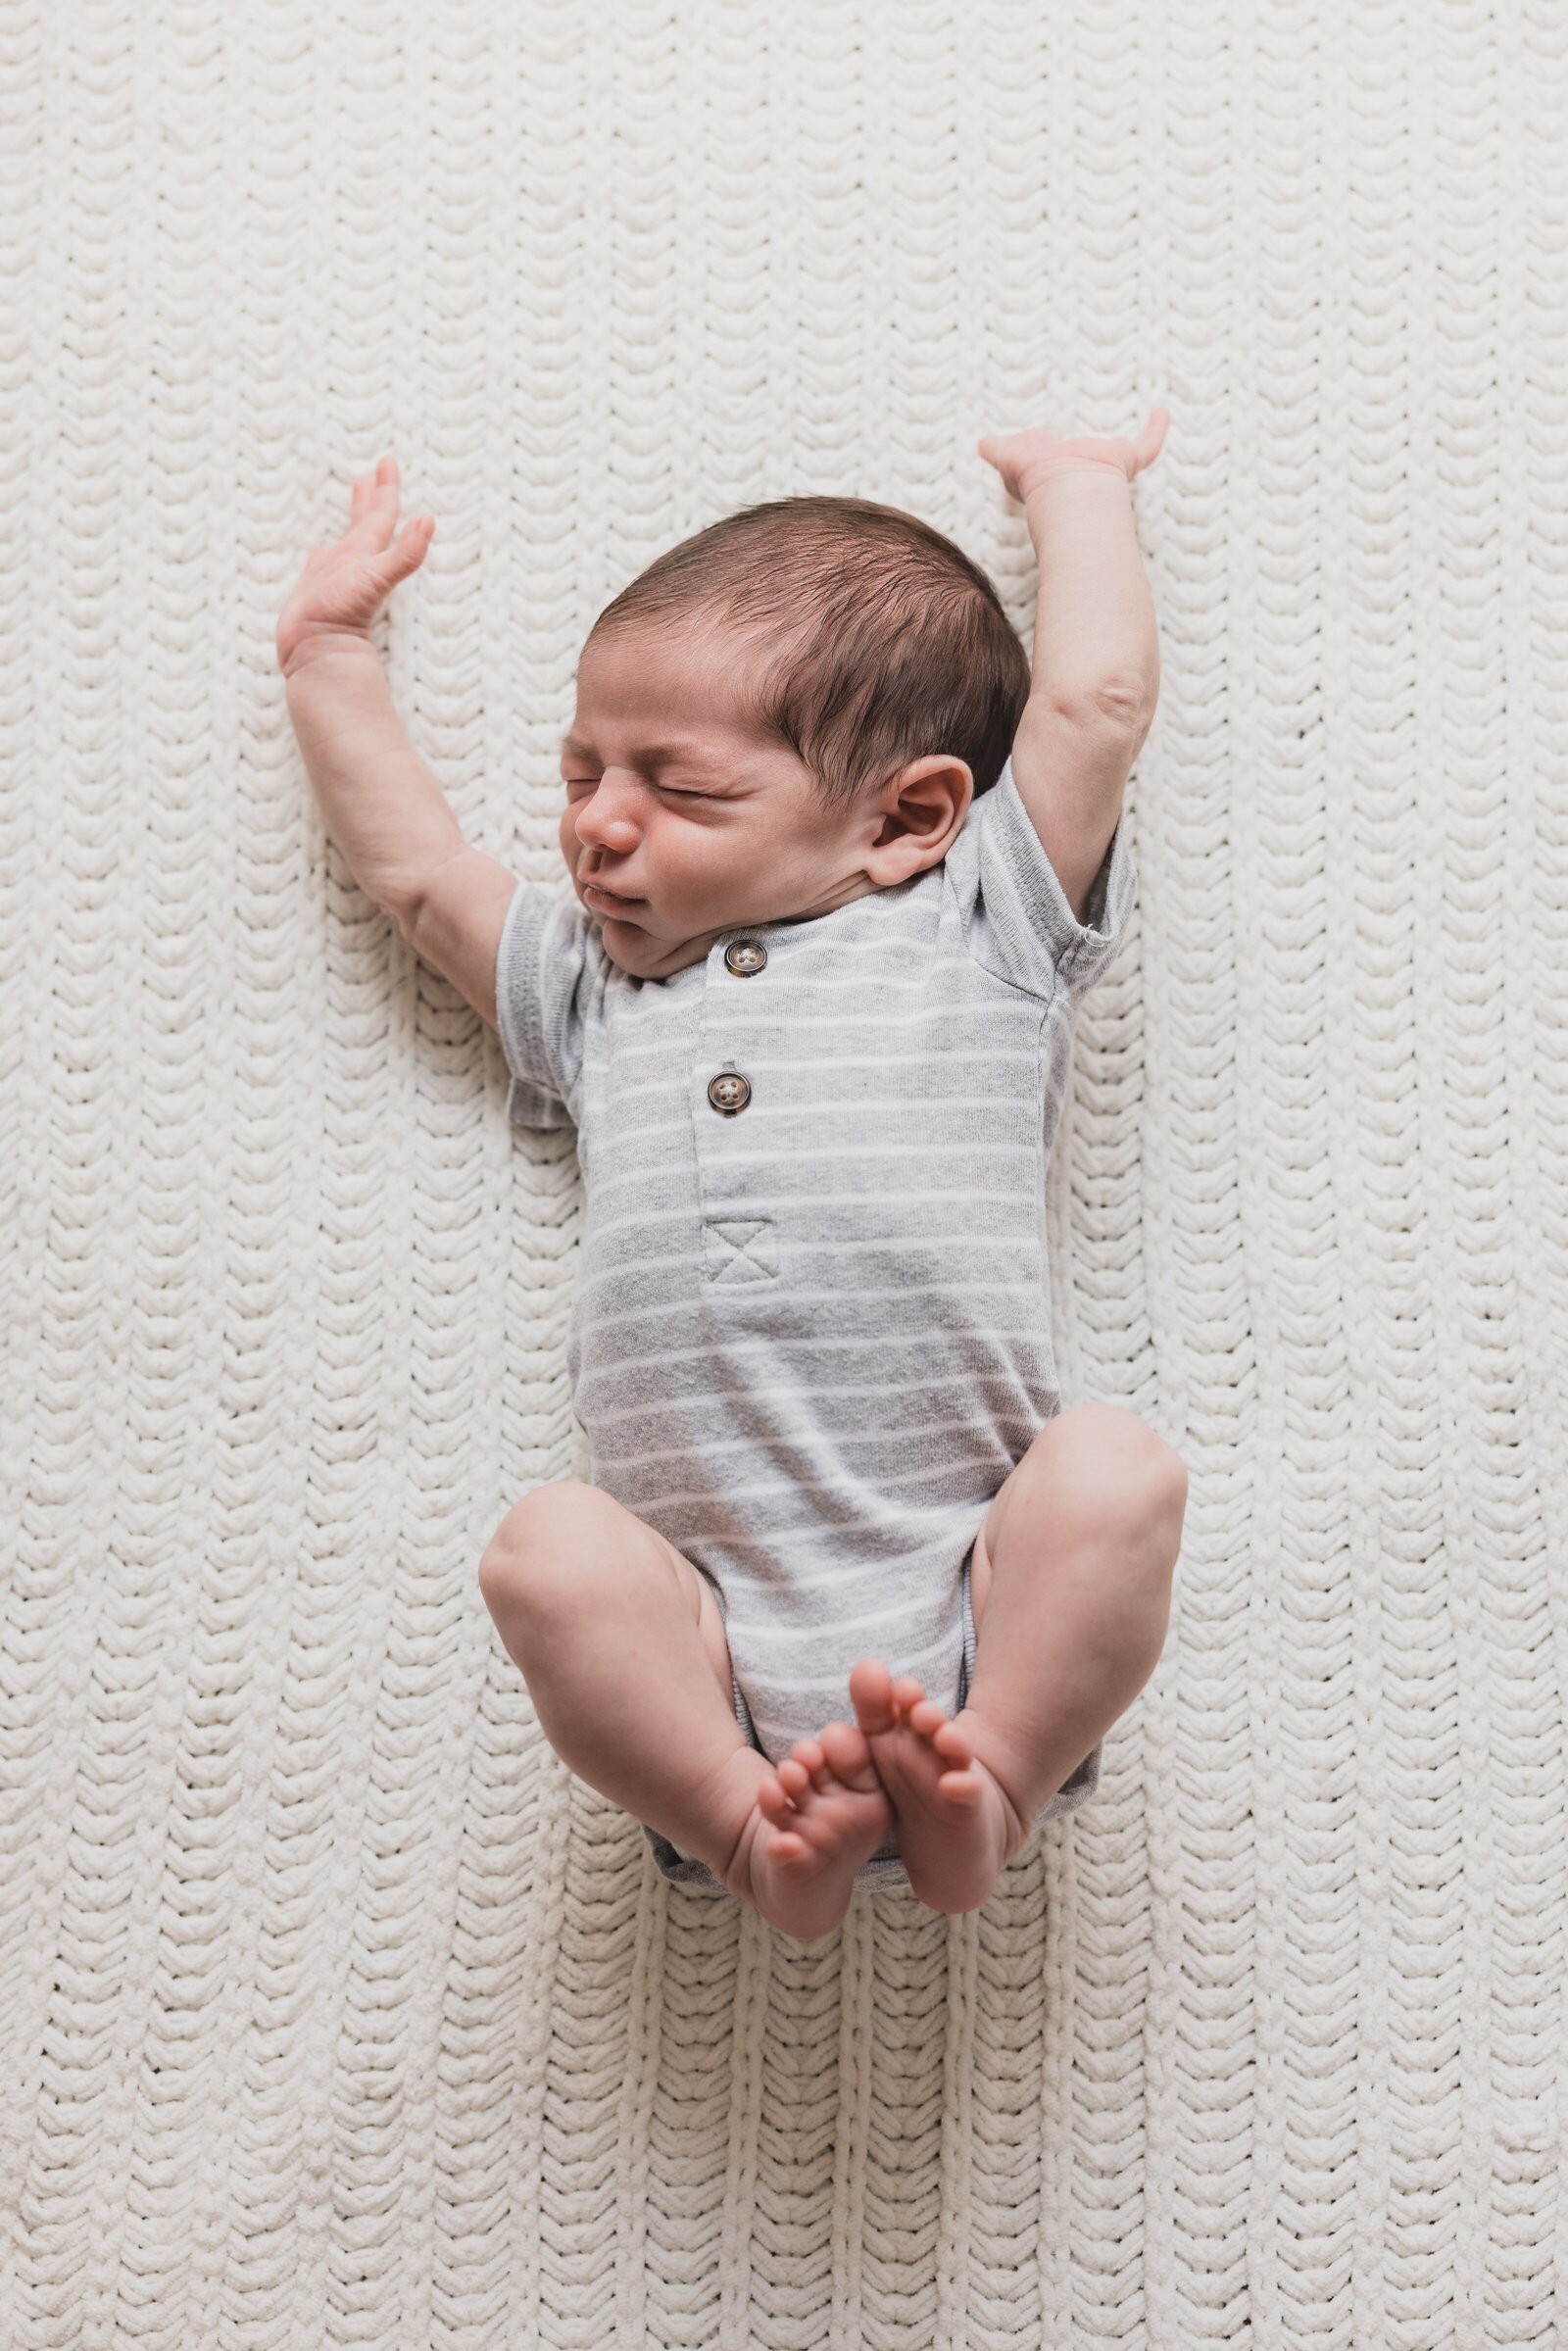 Newborn stretching during photography session in Pensacola, FL by Jennifer Beal Photography